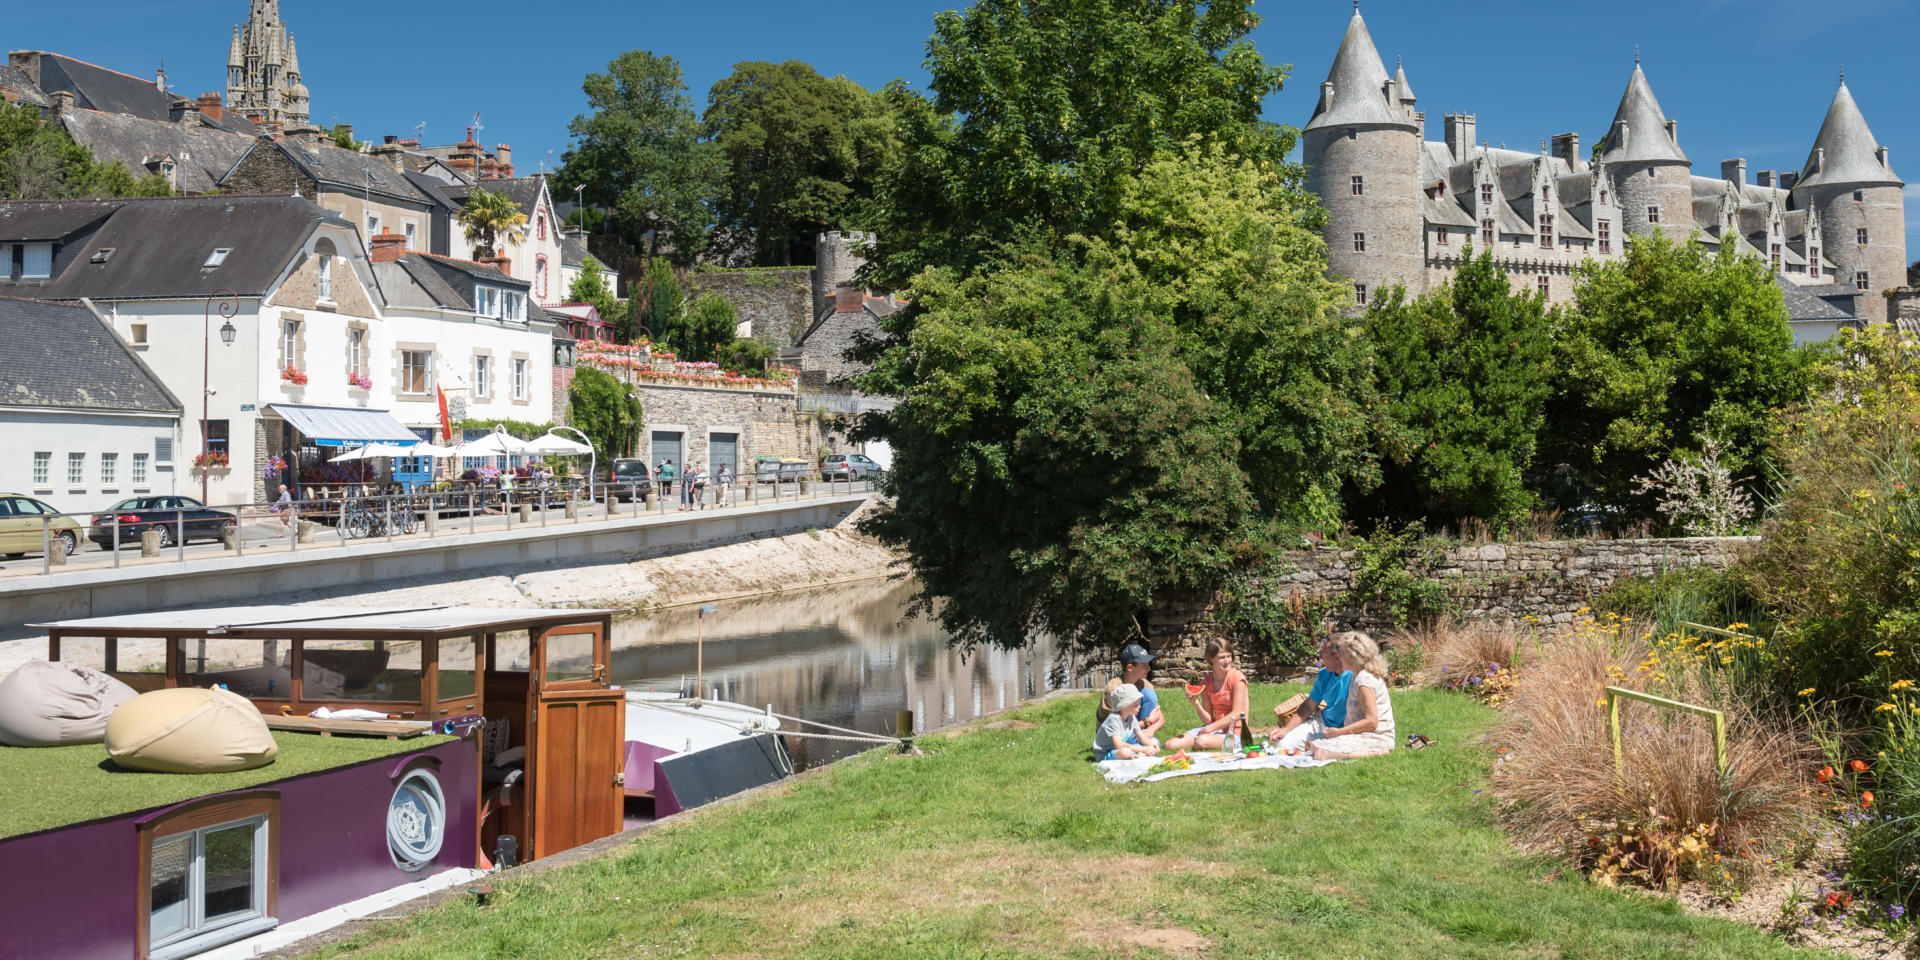 The Most Beautiful Cities Along The Canals Of Brittany Brittany Tourism